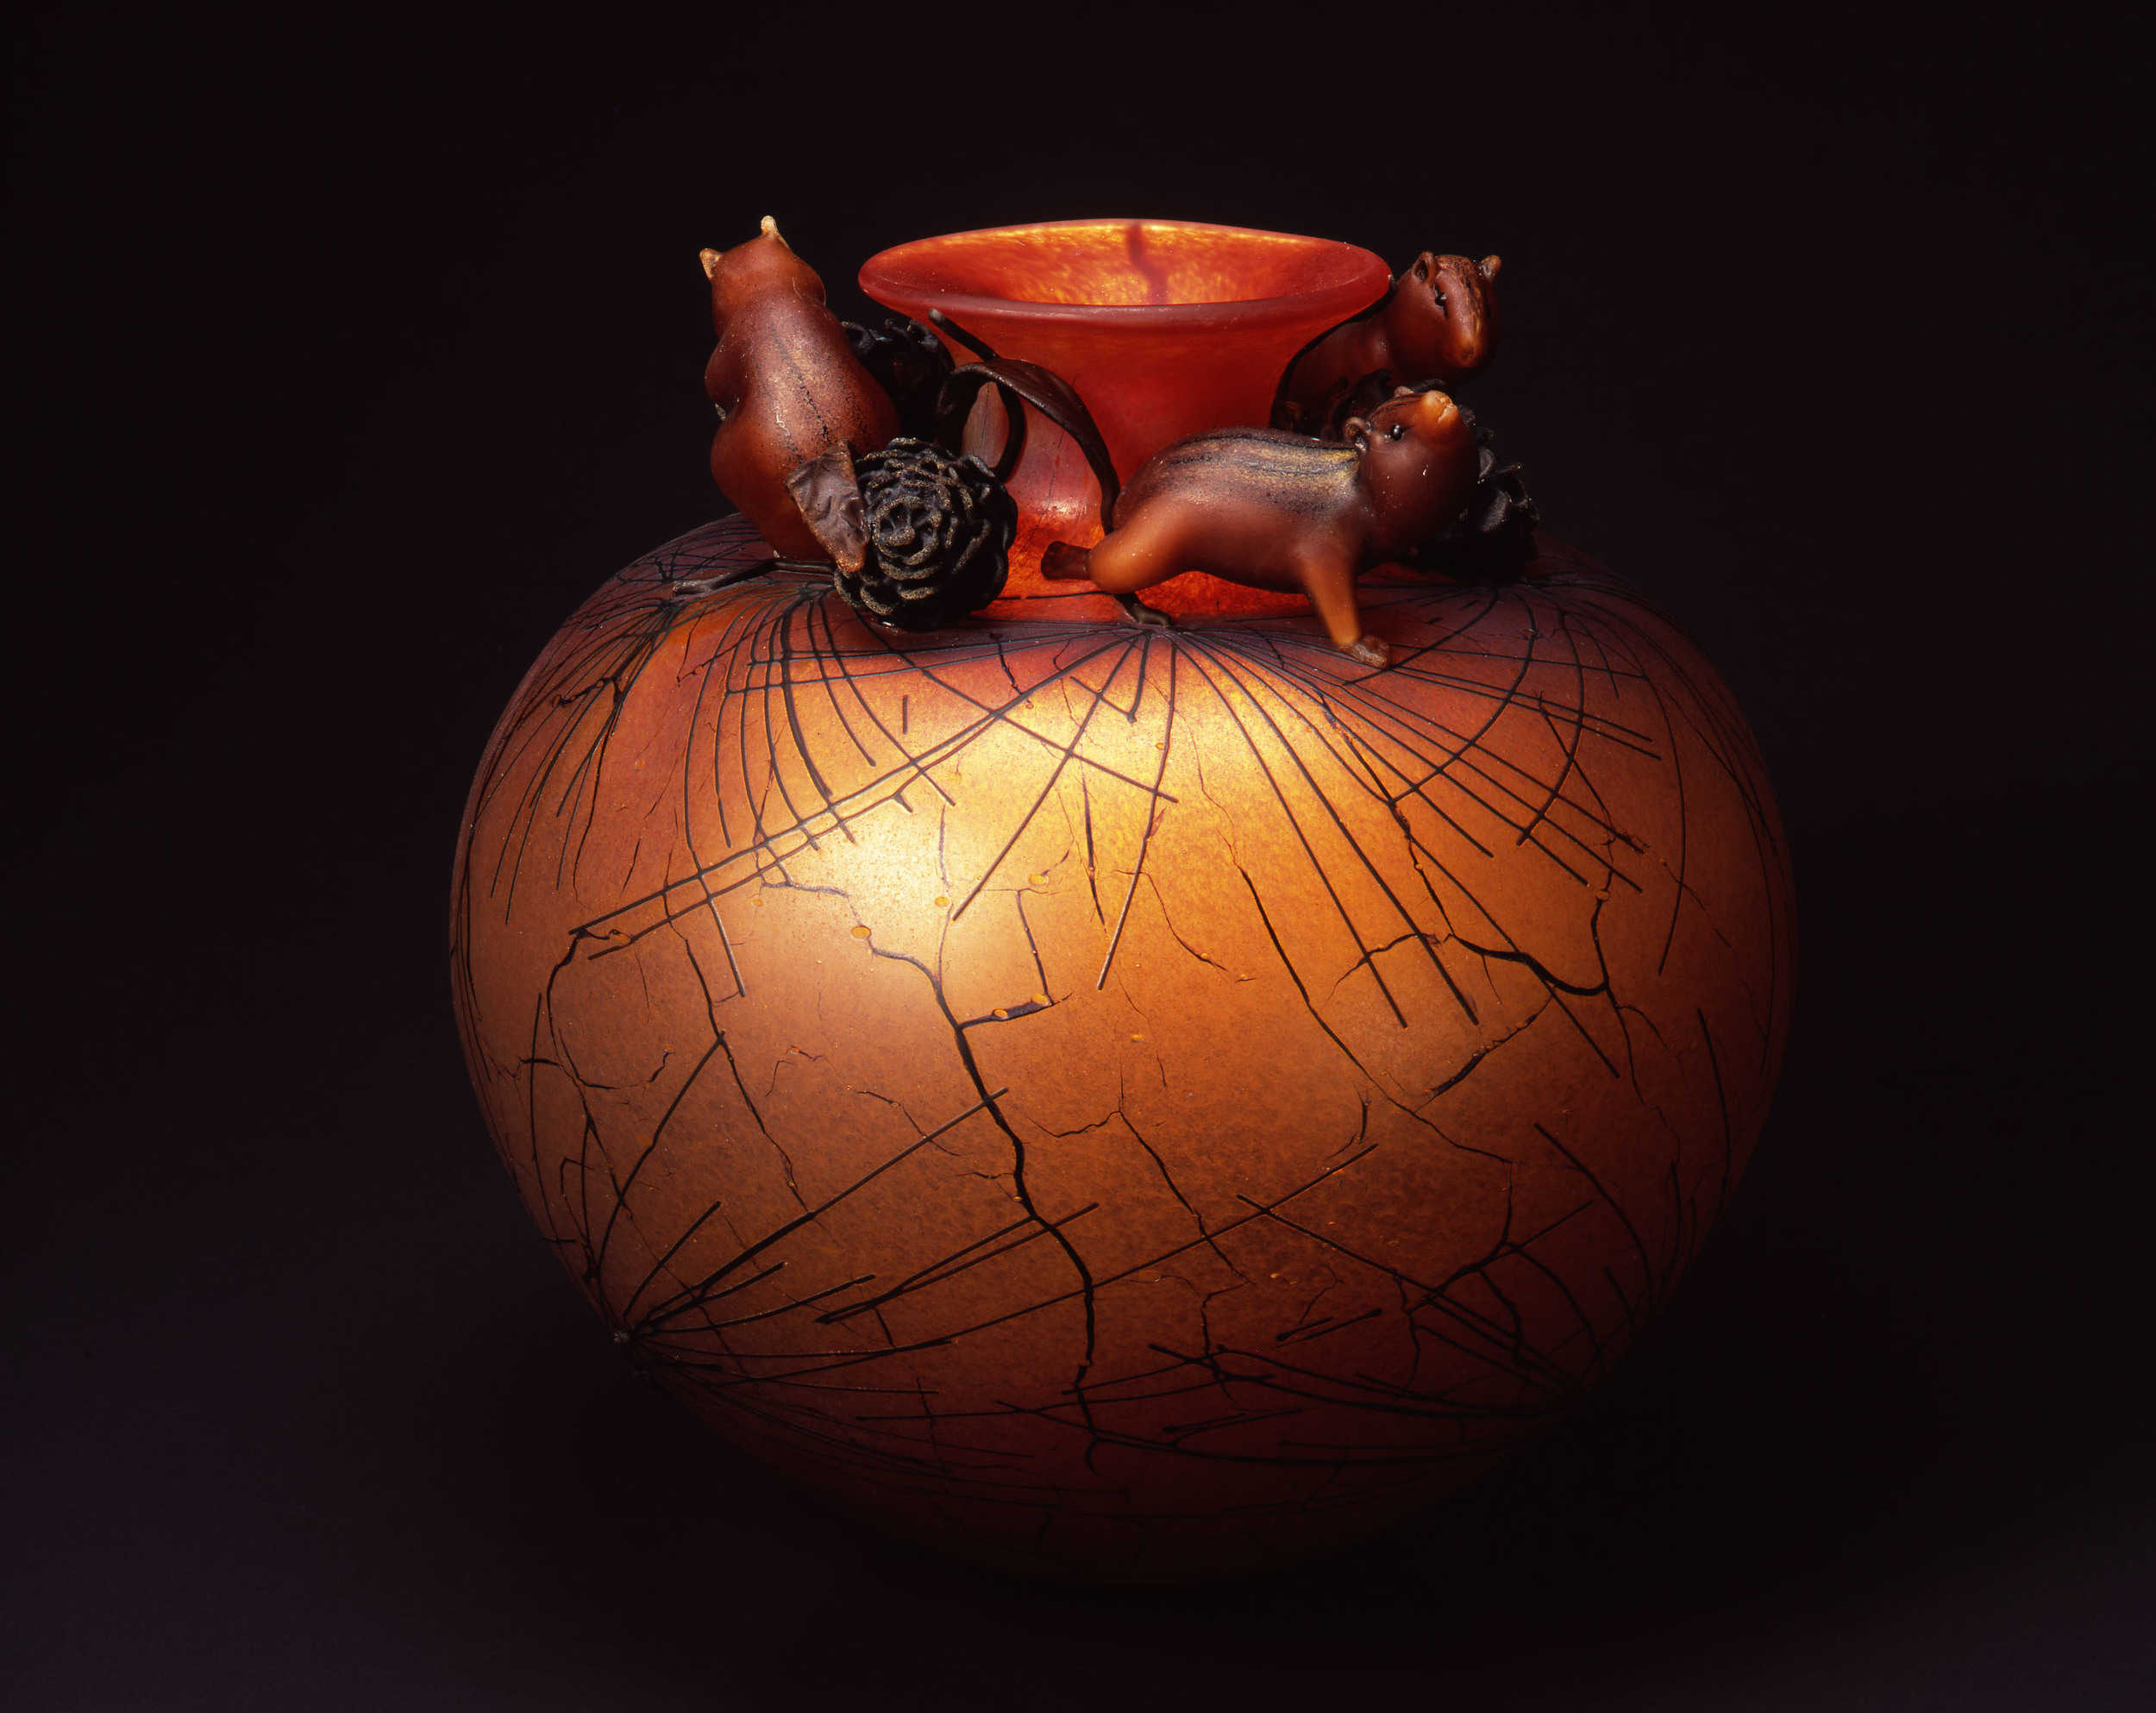  William Morris,  Globe Vessel with Ponderosa Pine Needles and Golden-mantled Ground Squirrels&nbsp; (2004, glass, 16 x 16 x 16 inches), WM.57 